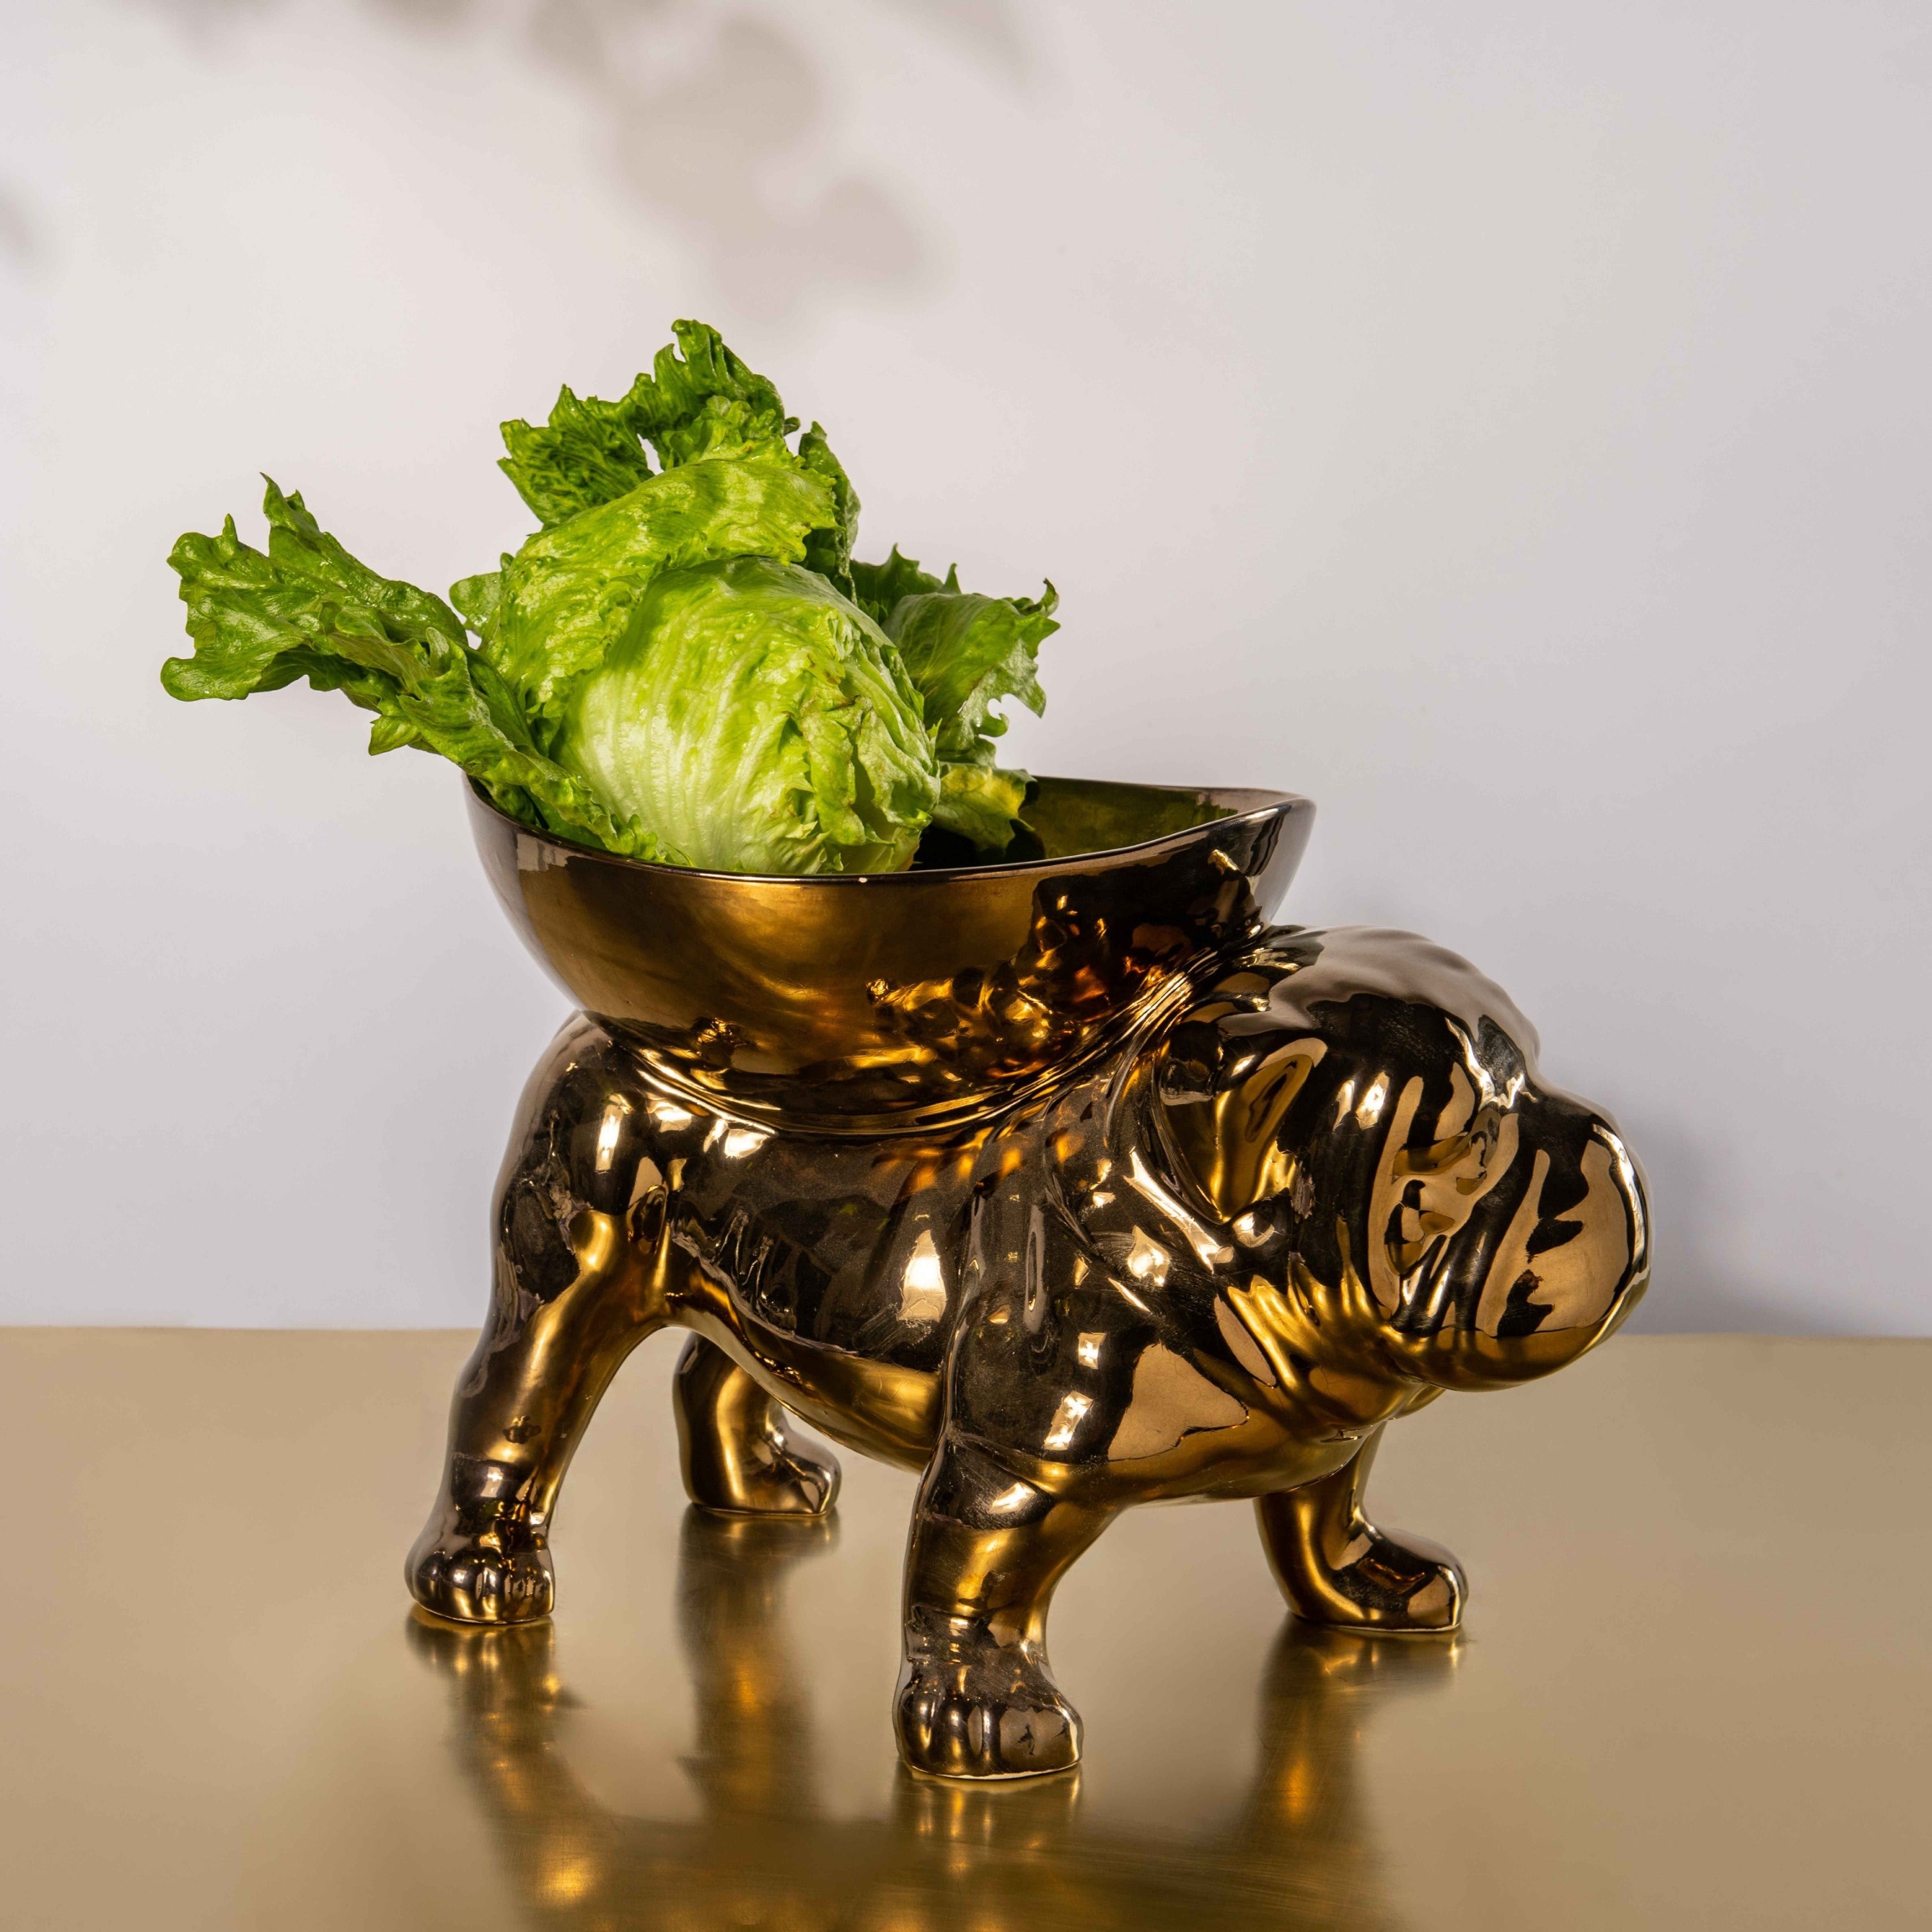 BRUTUS BULLDOG BOWL EXTRA LARGE - Rialheim  An extra large fruit bowl in the shape of a bulldog, with a wrinkled face, pushed-in nose, and a golden-brown finish